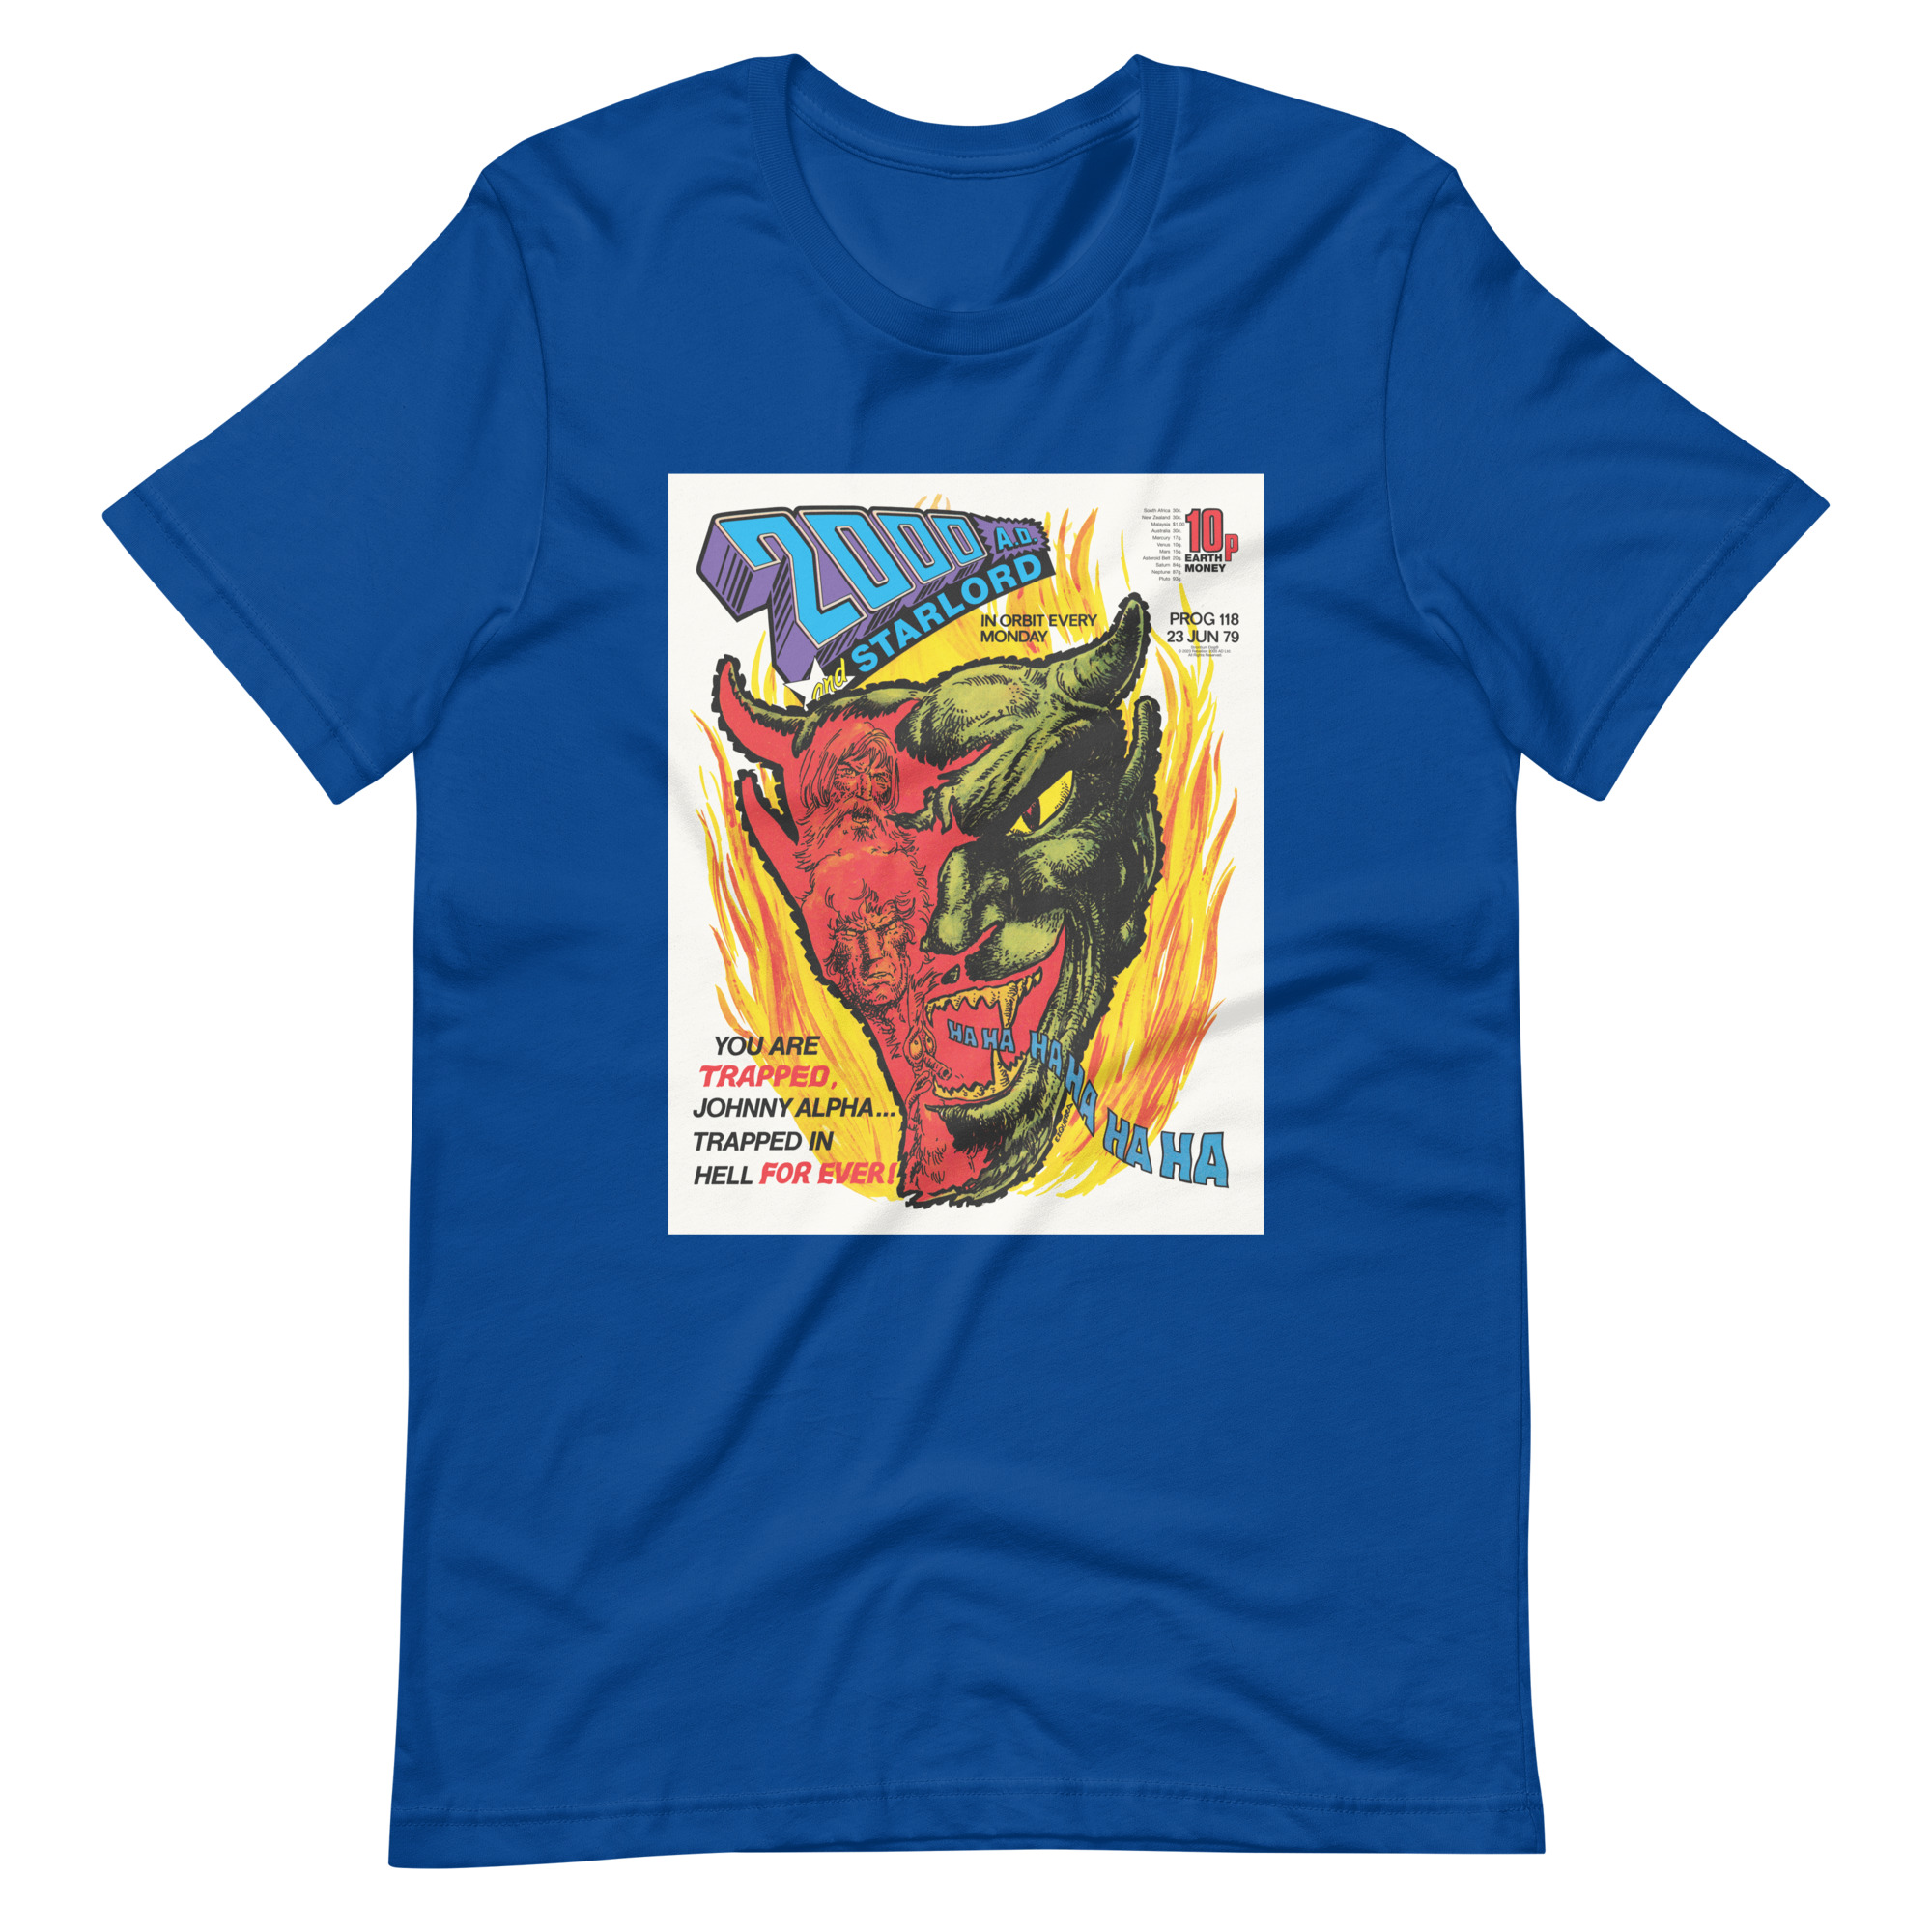 Royal Blue Tshirt with an image on the chest. Image is cover of 2000 AD prog 118 and depicts a laughing Devil face in flames